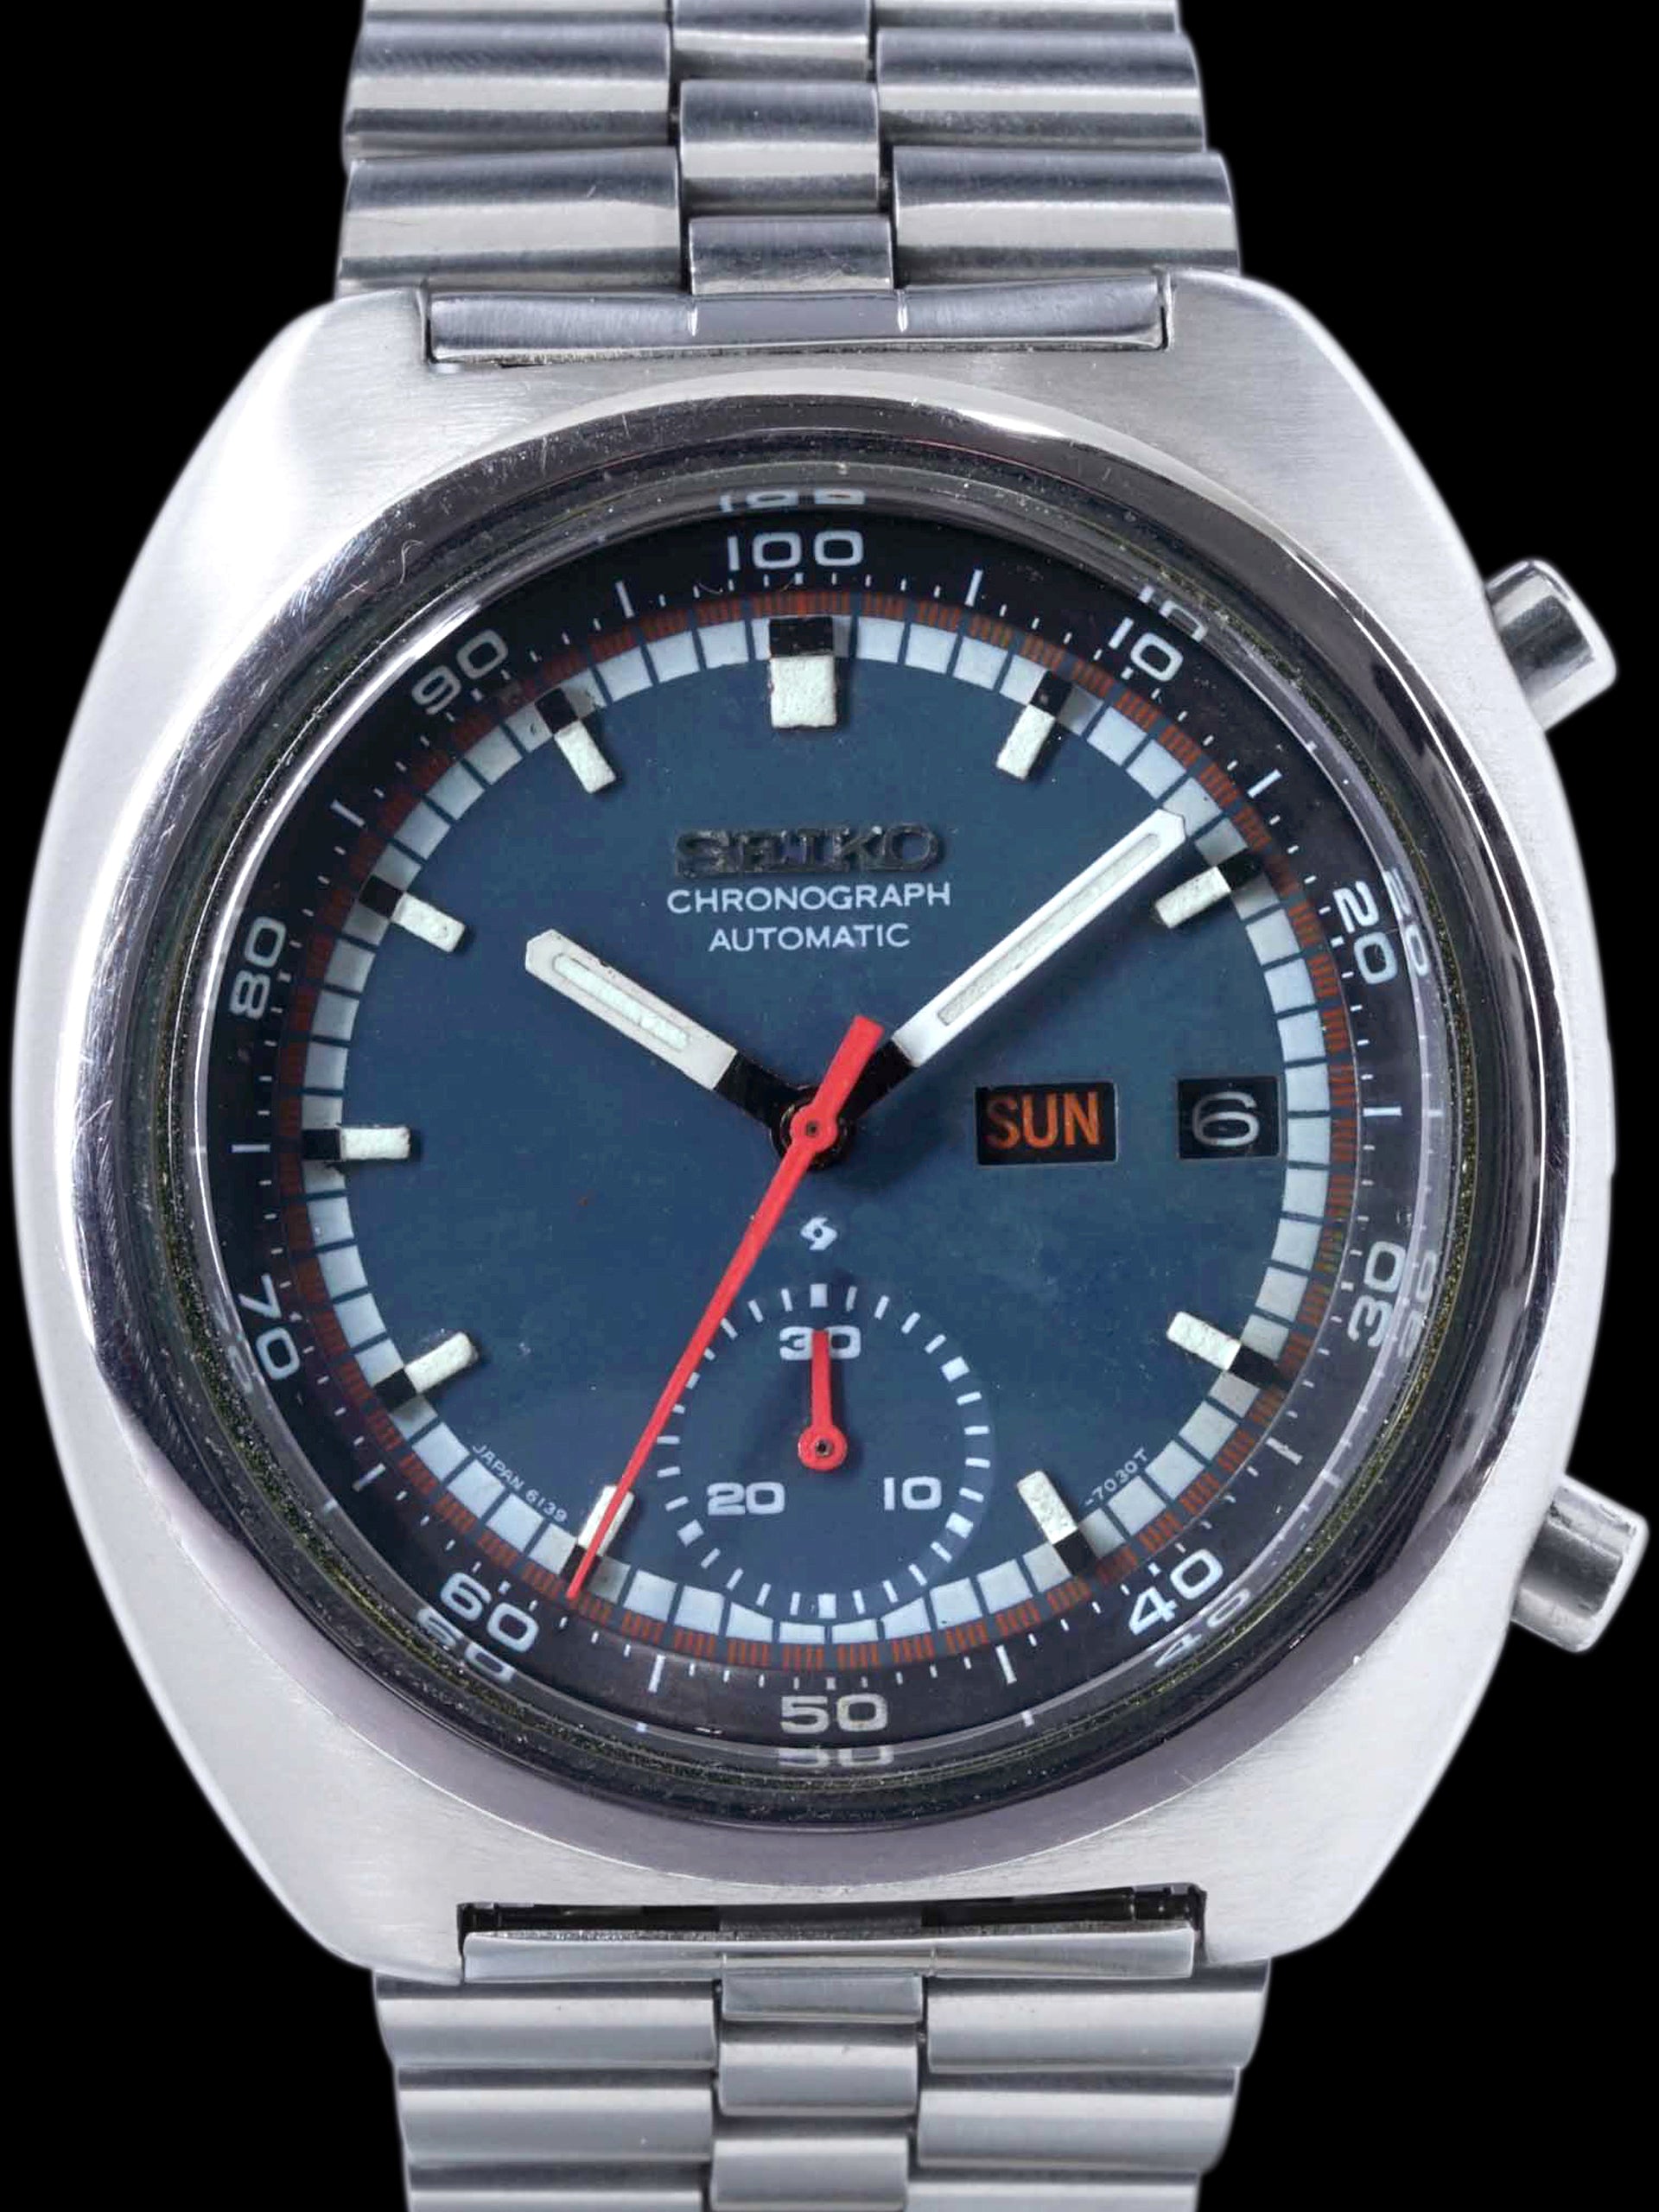 Ved daggry Opaque Af storm 1973 Seiko Chronograph (Ref. 6139-7002)